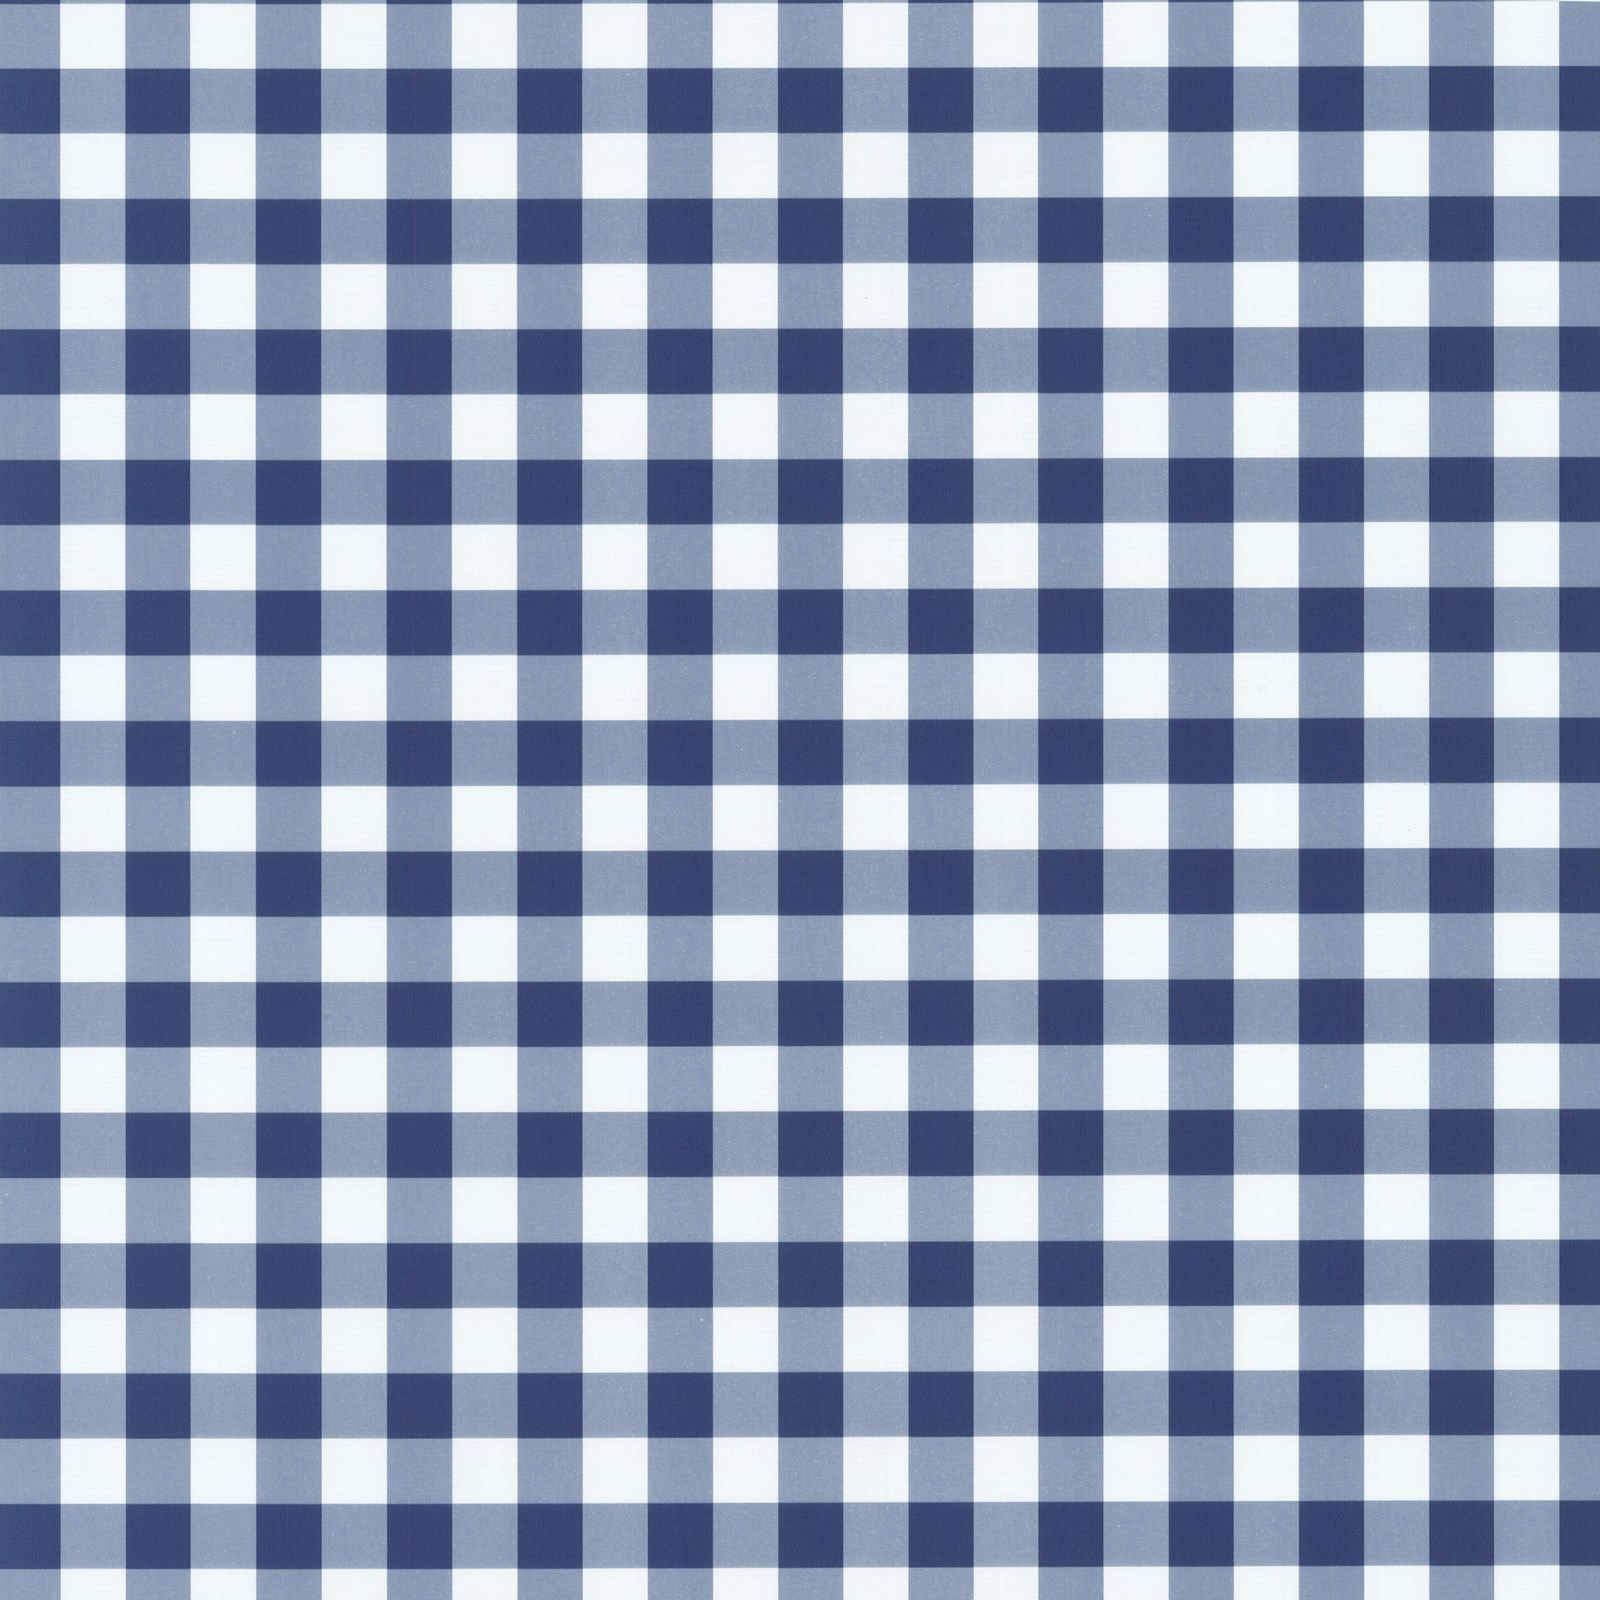 Navy and White Checkered Wallpaper